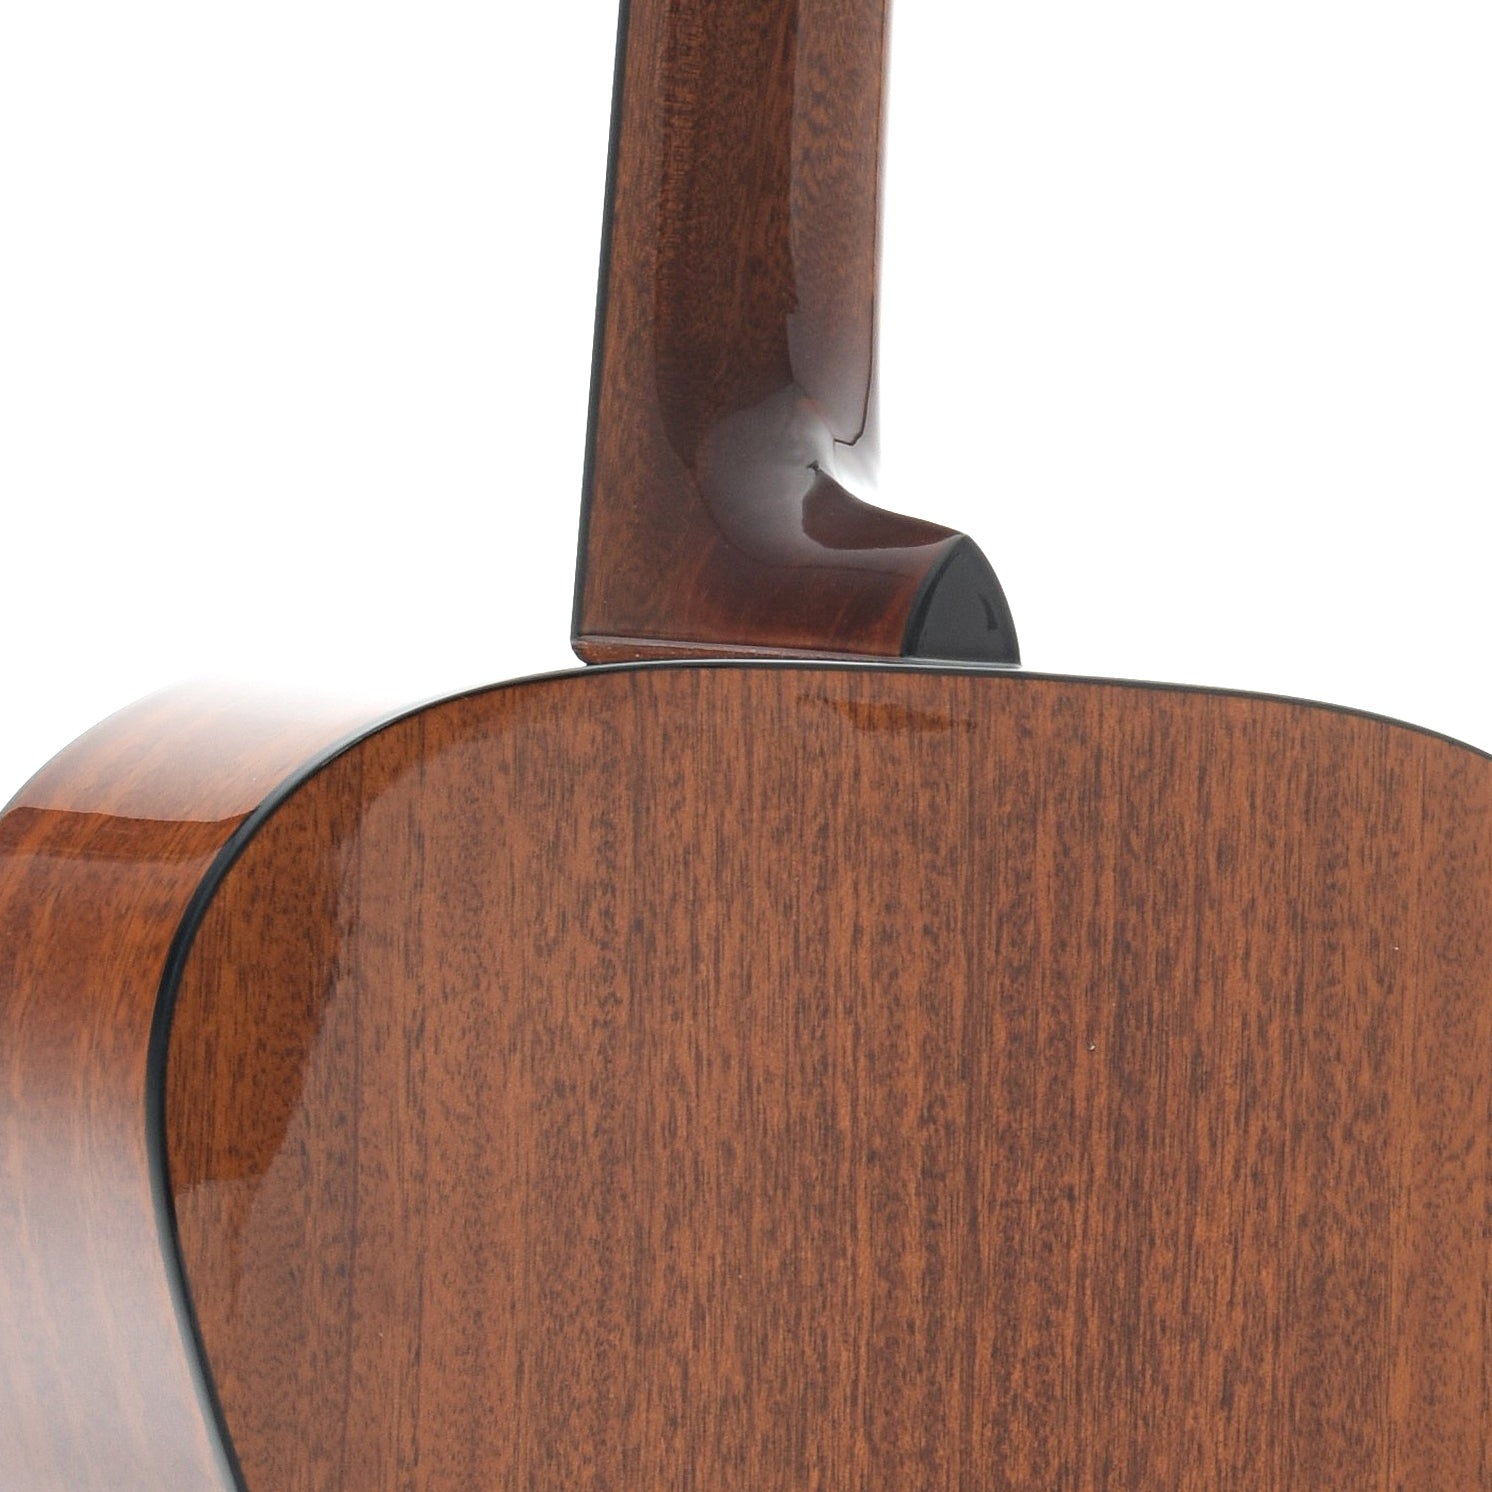 Image 11 of * Elderly Instruments "000" Guitar Outfit - SKU# DEAL2 : Product Type Flat-top Guitars : Elderly Instruments